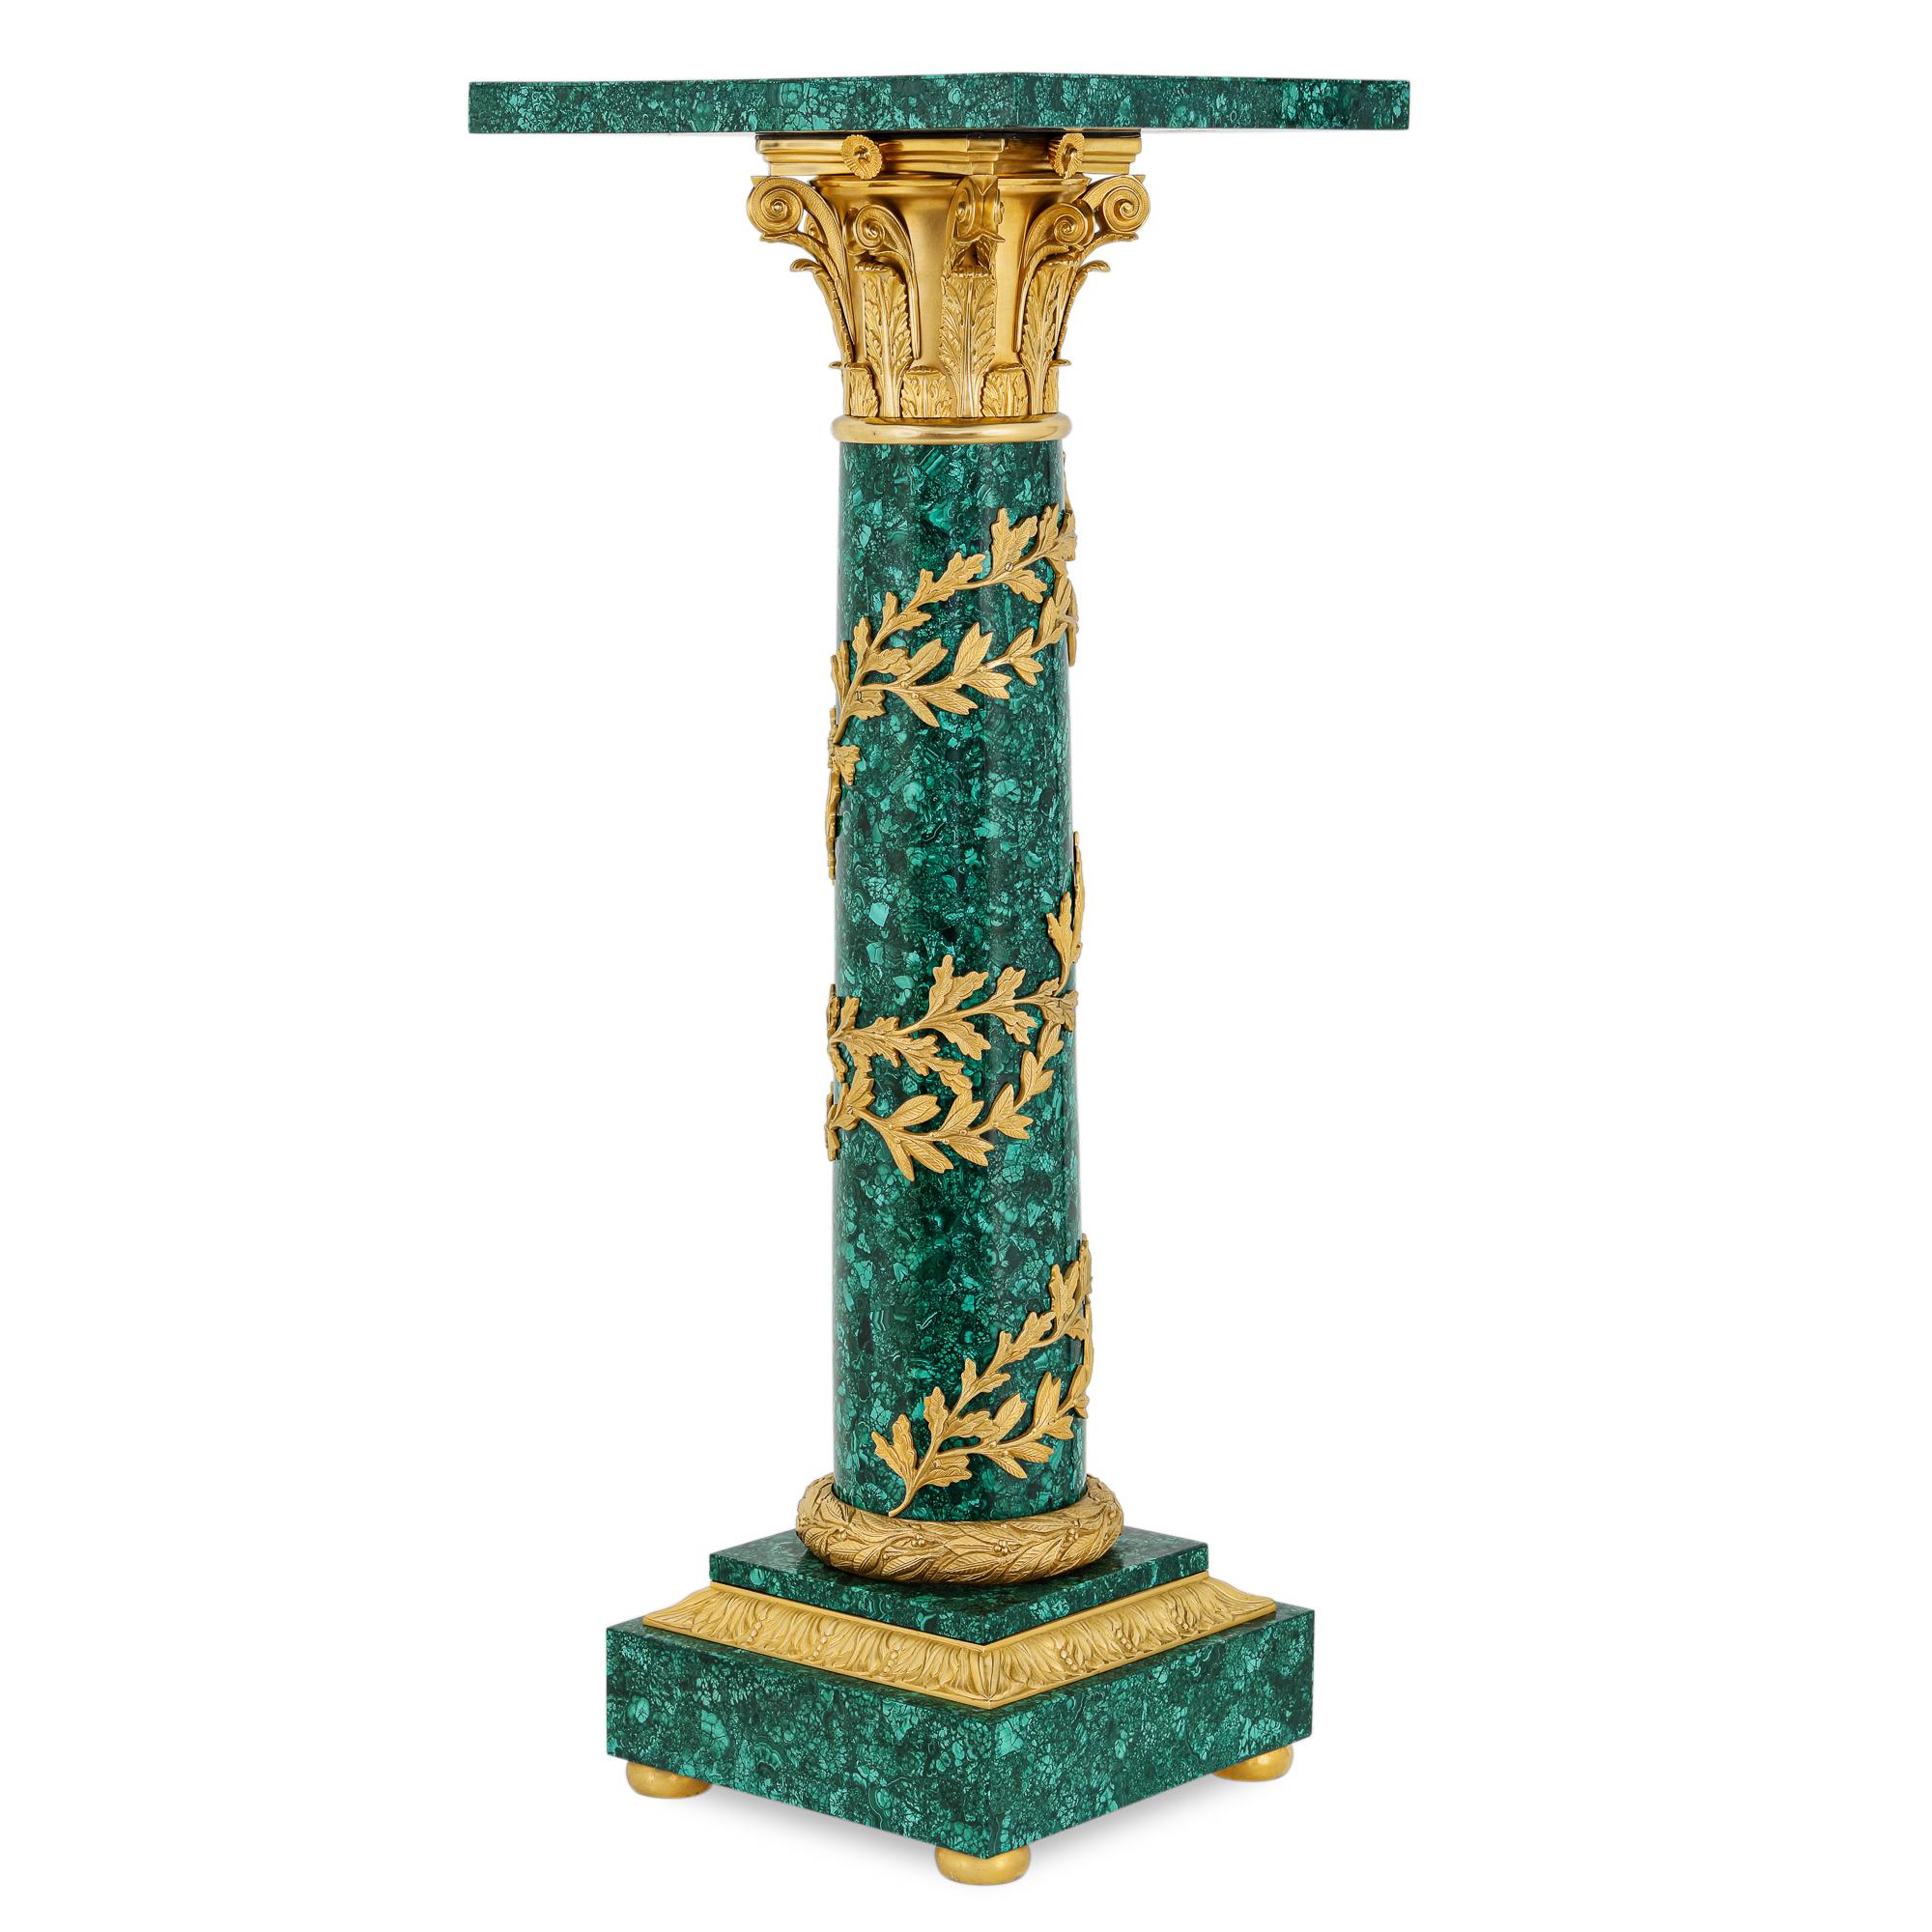 Magnificent pair of neoclassical style gilt bronze Mounted Malachite Columns highlighted with Ormolu foliage Wrapped around the Main body of the columns in a circular fashion. These columns were crafted in the style of Louis XV1 circa 18 century.